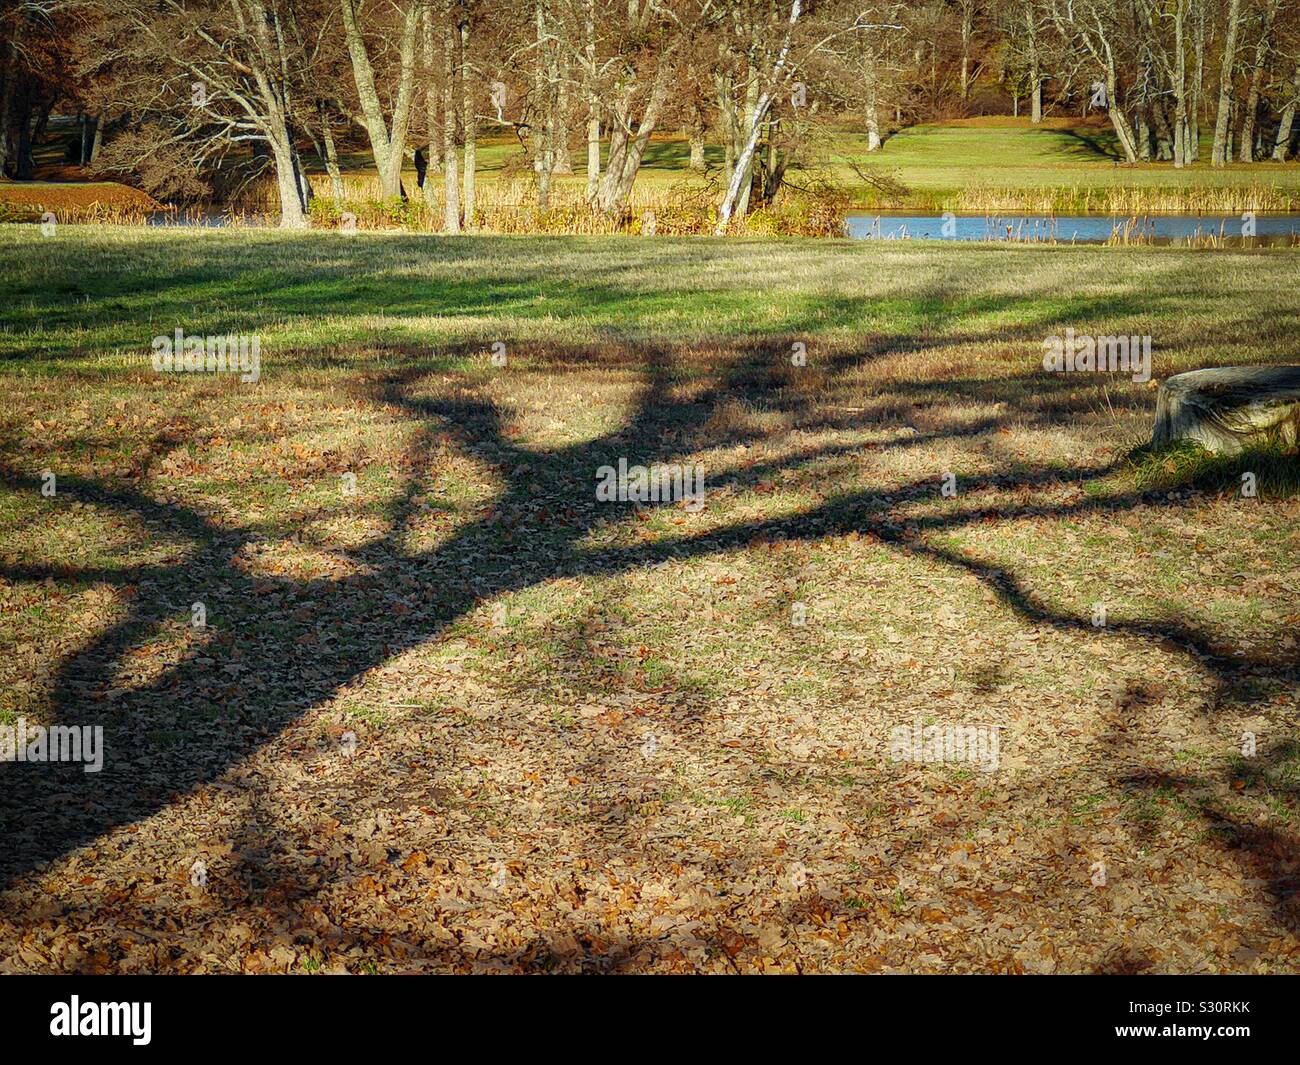 Shadow of tree on ground, Sweden Stock Photo